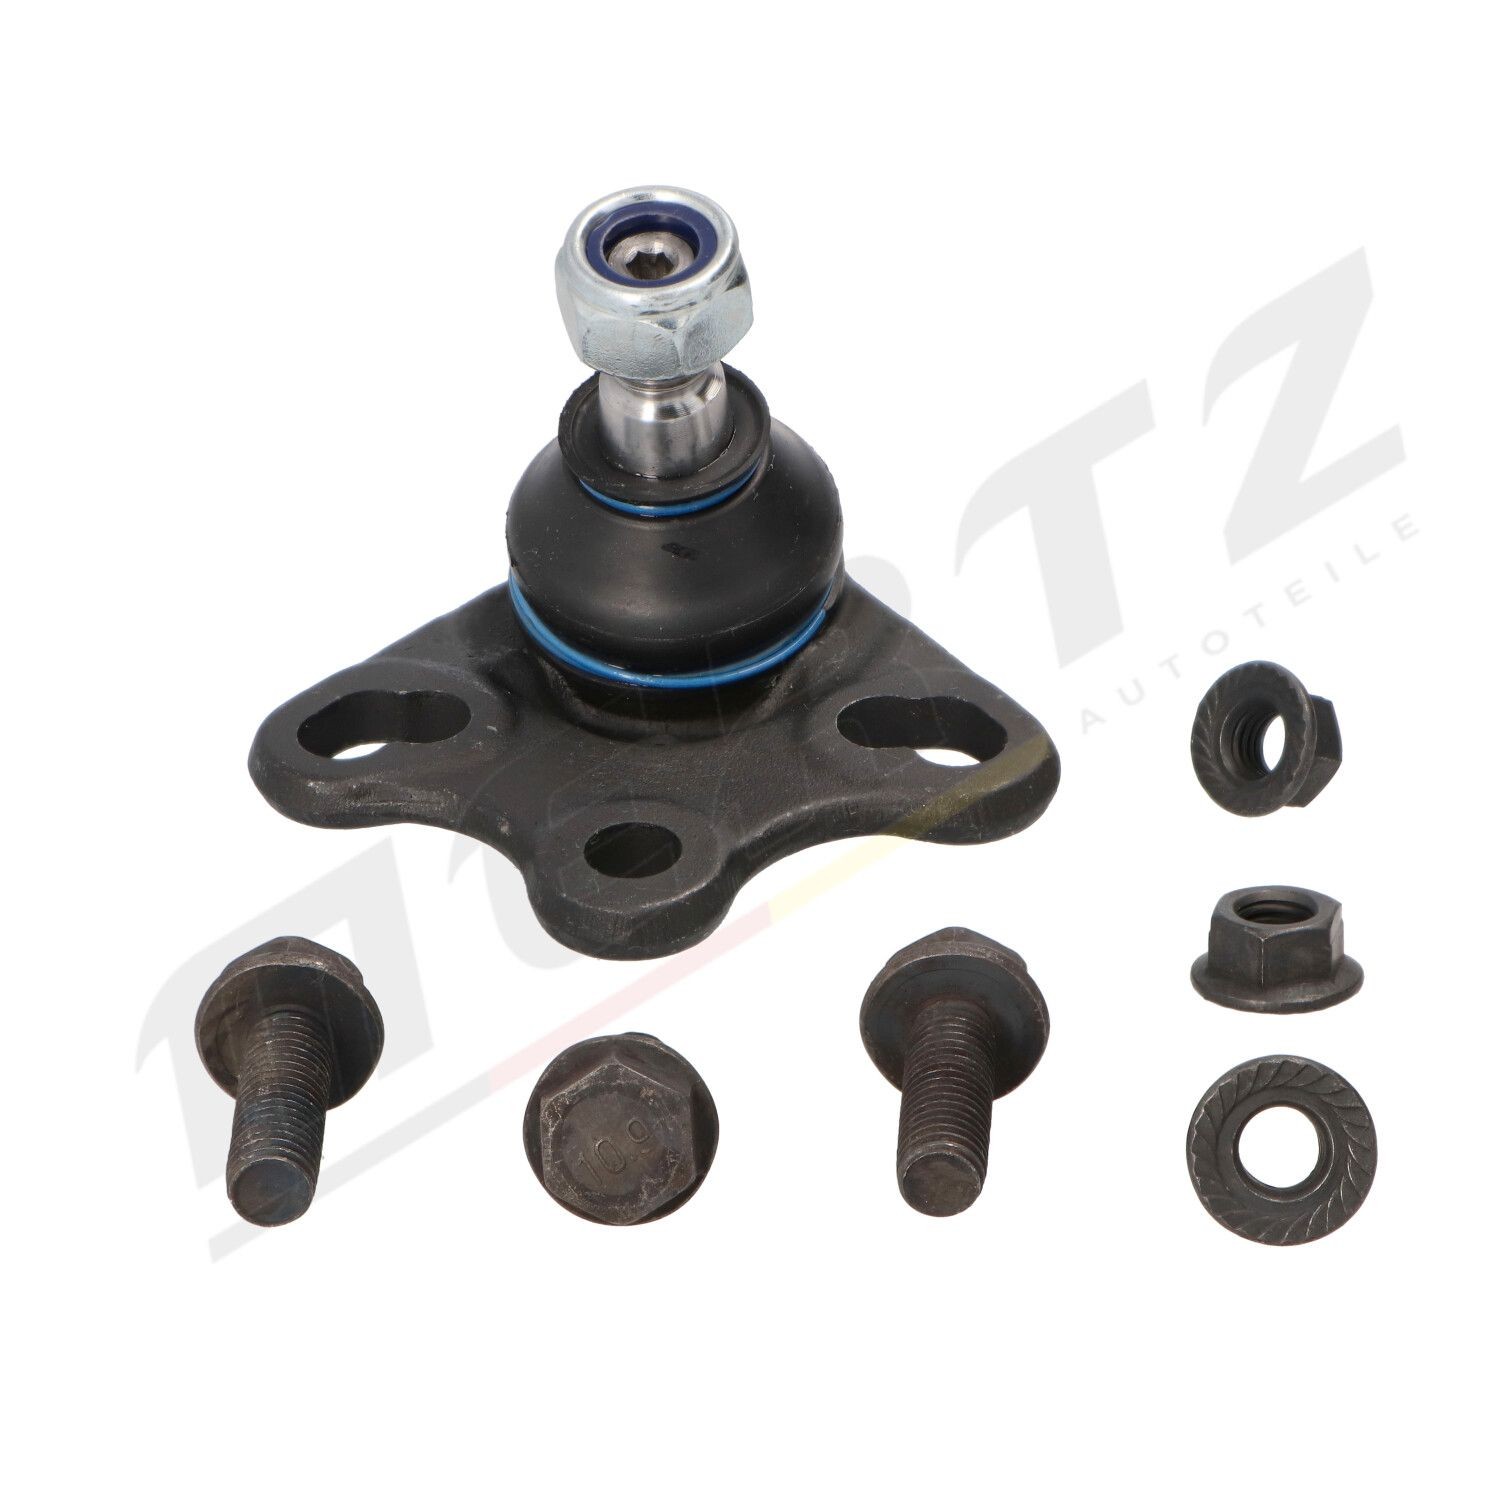 Original M-S0056 MERTZ Ball joint experience and price